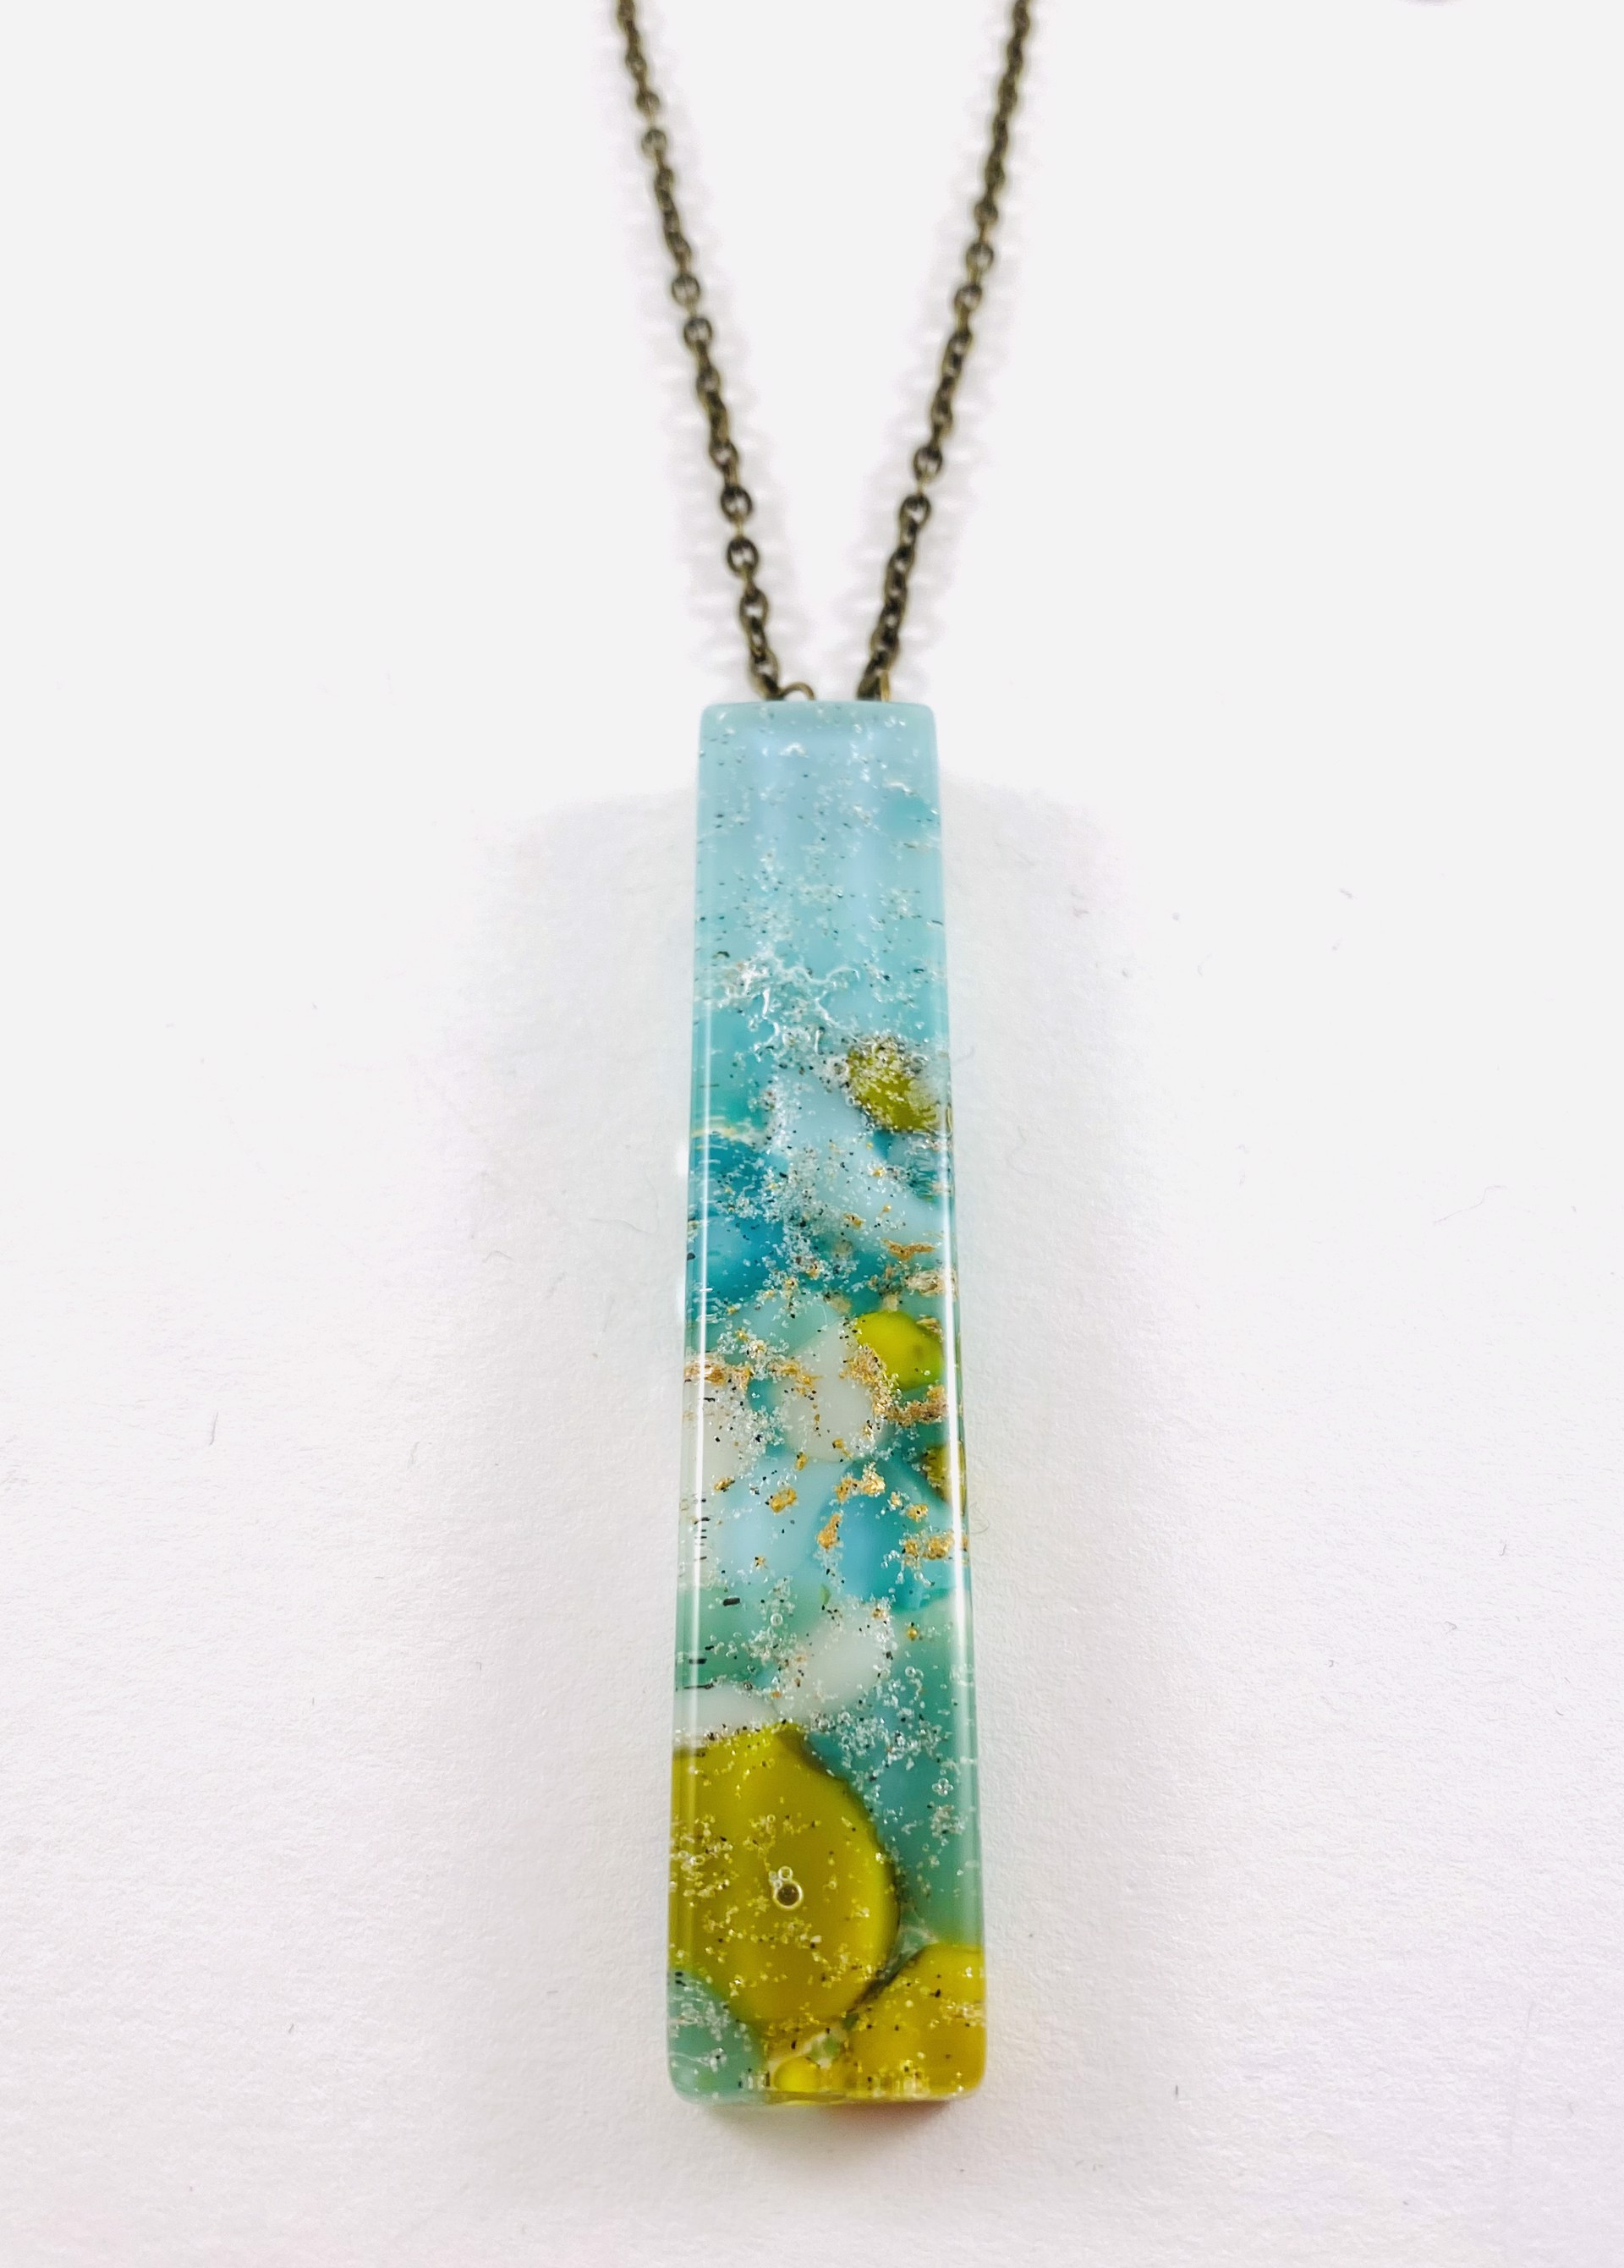 3n “Beachwalk” 30 inch Necklace by Emily Cook